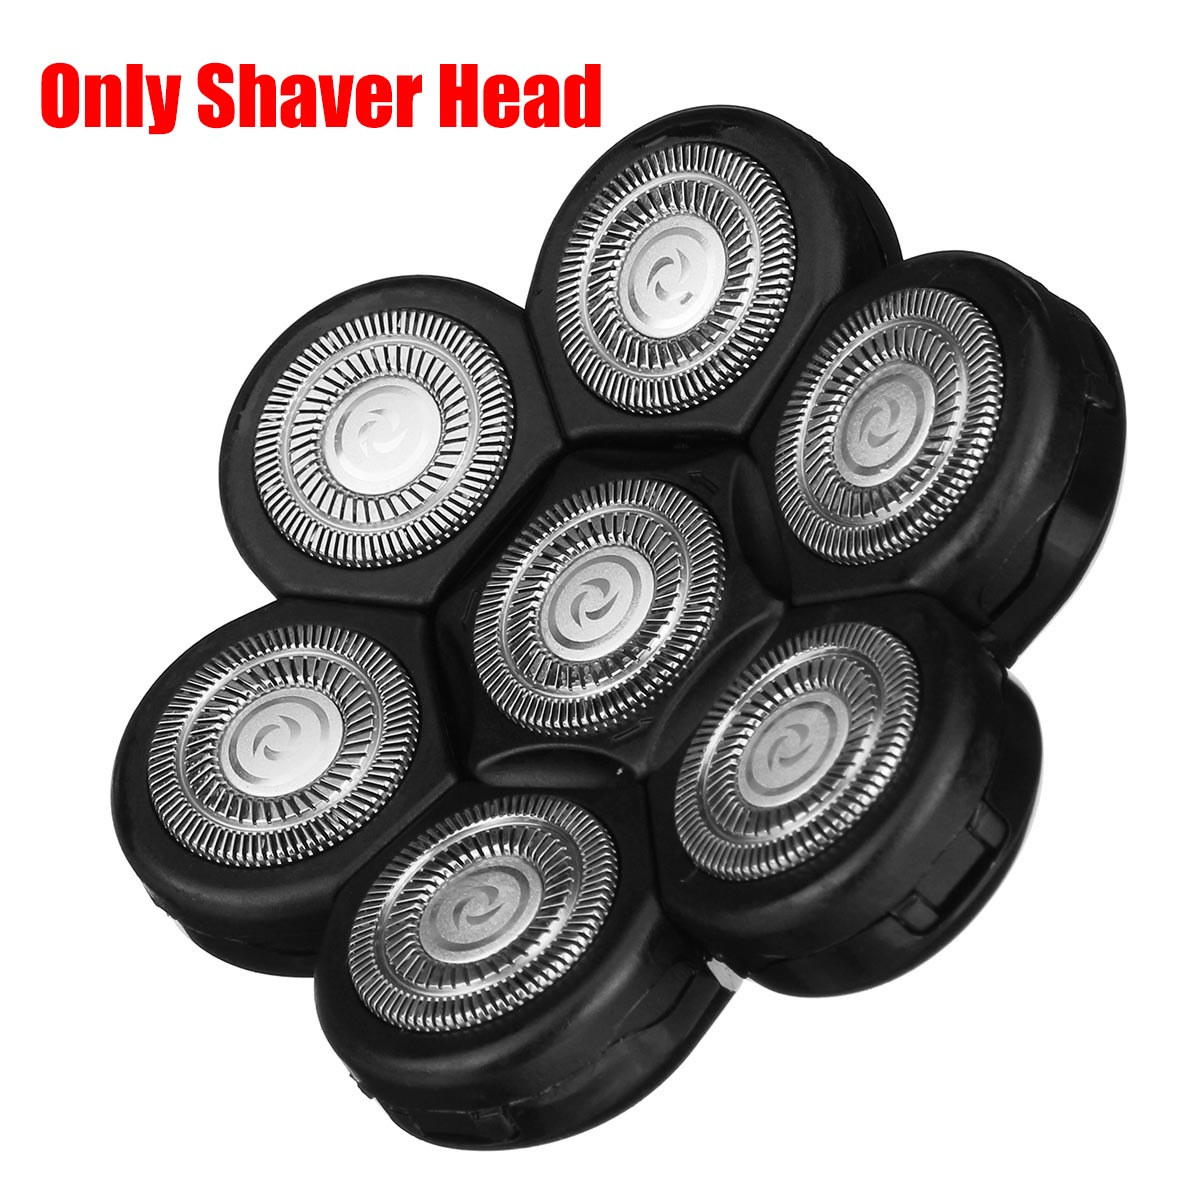 5In1 7D Electric Shaver Beard Razor USB Rechargeable Bald Head Shaver Sideburns Nose Hair Trimmer